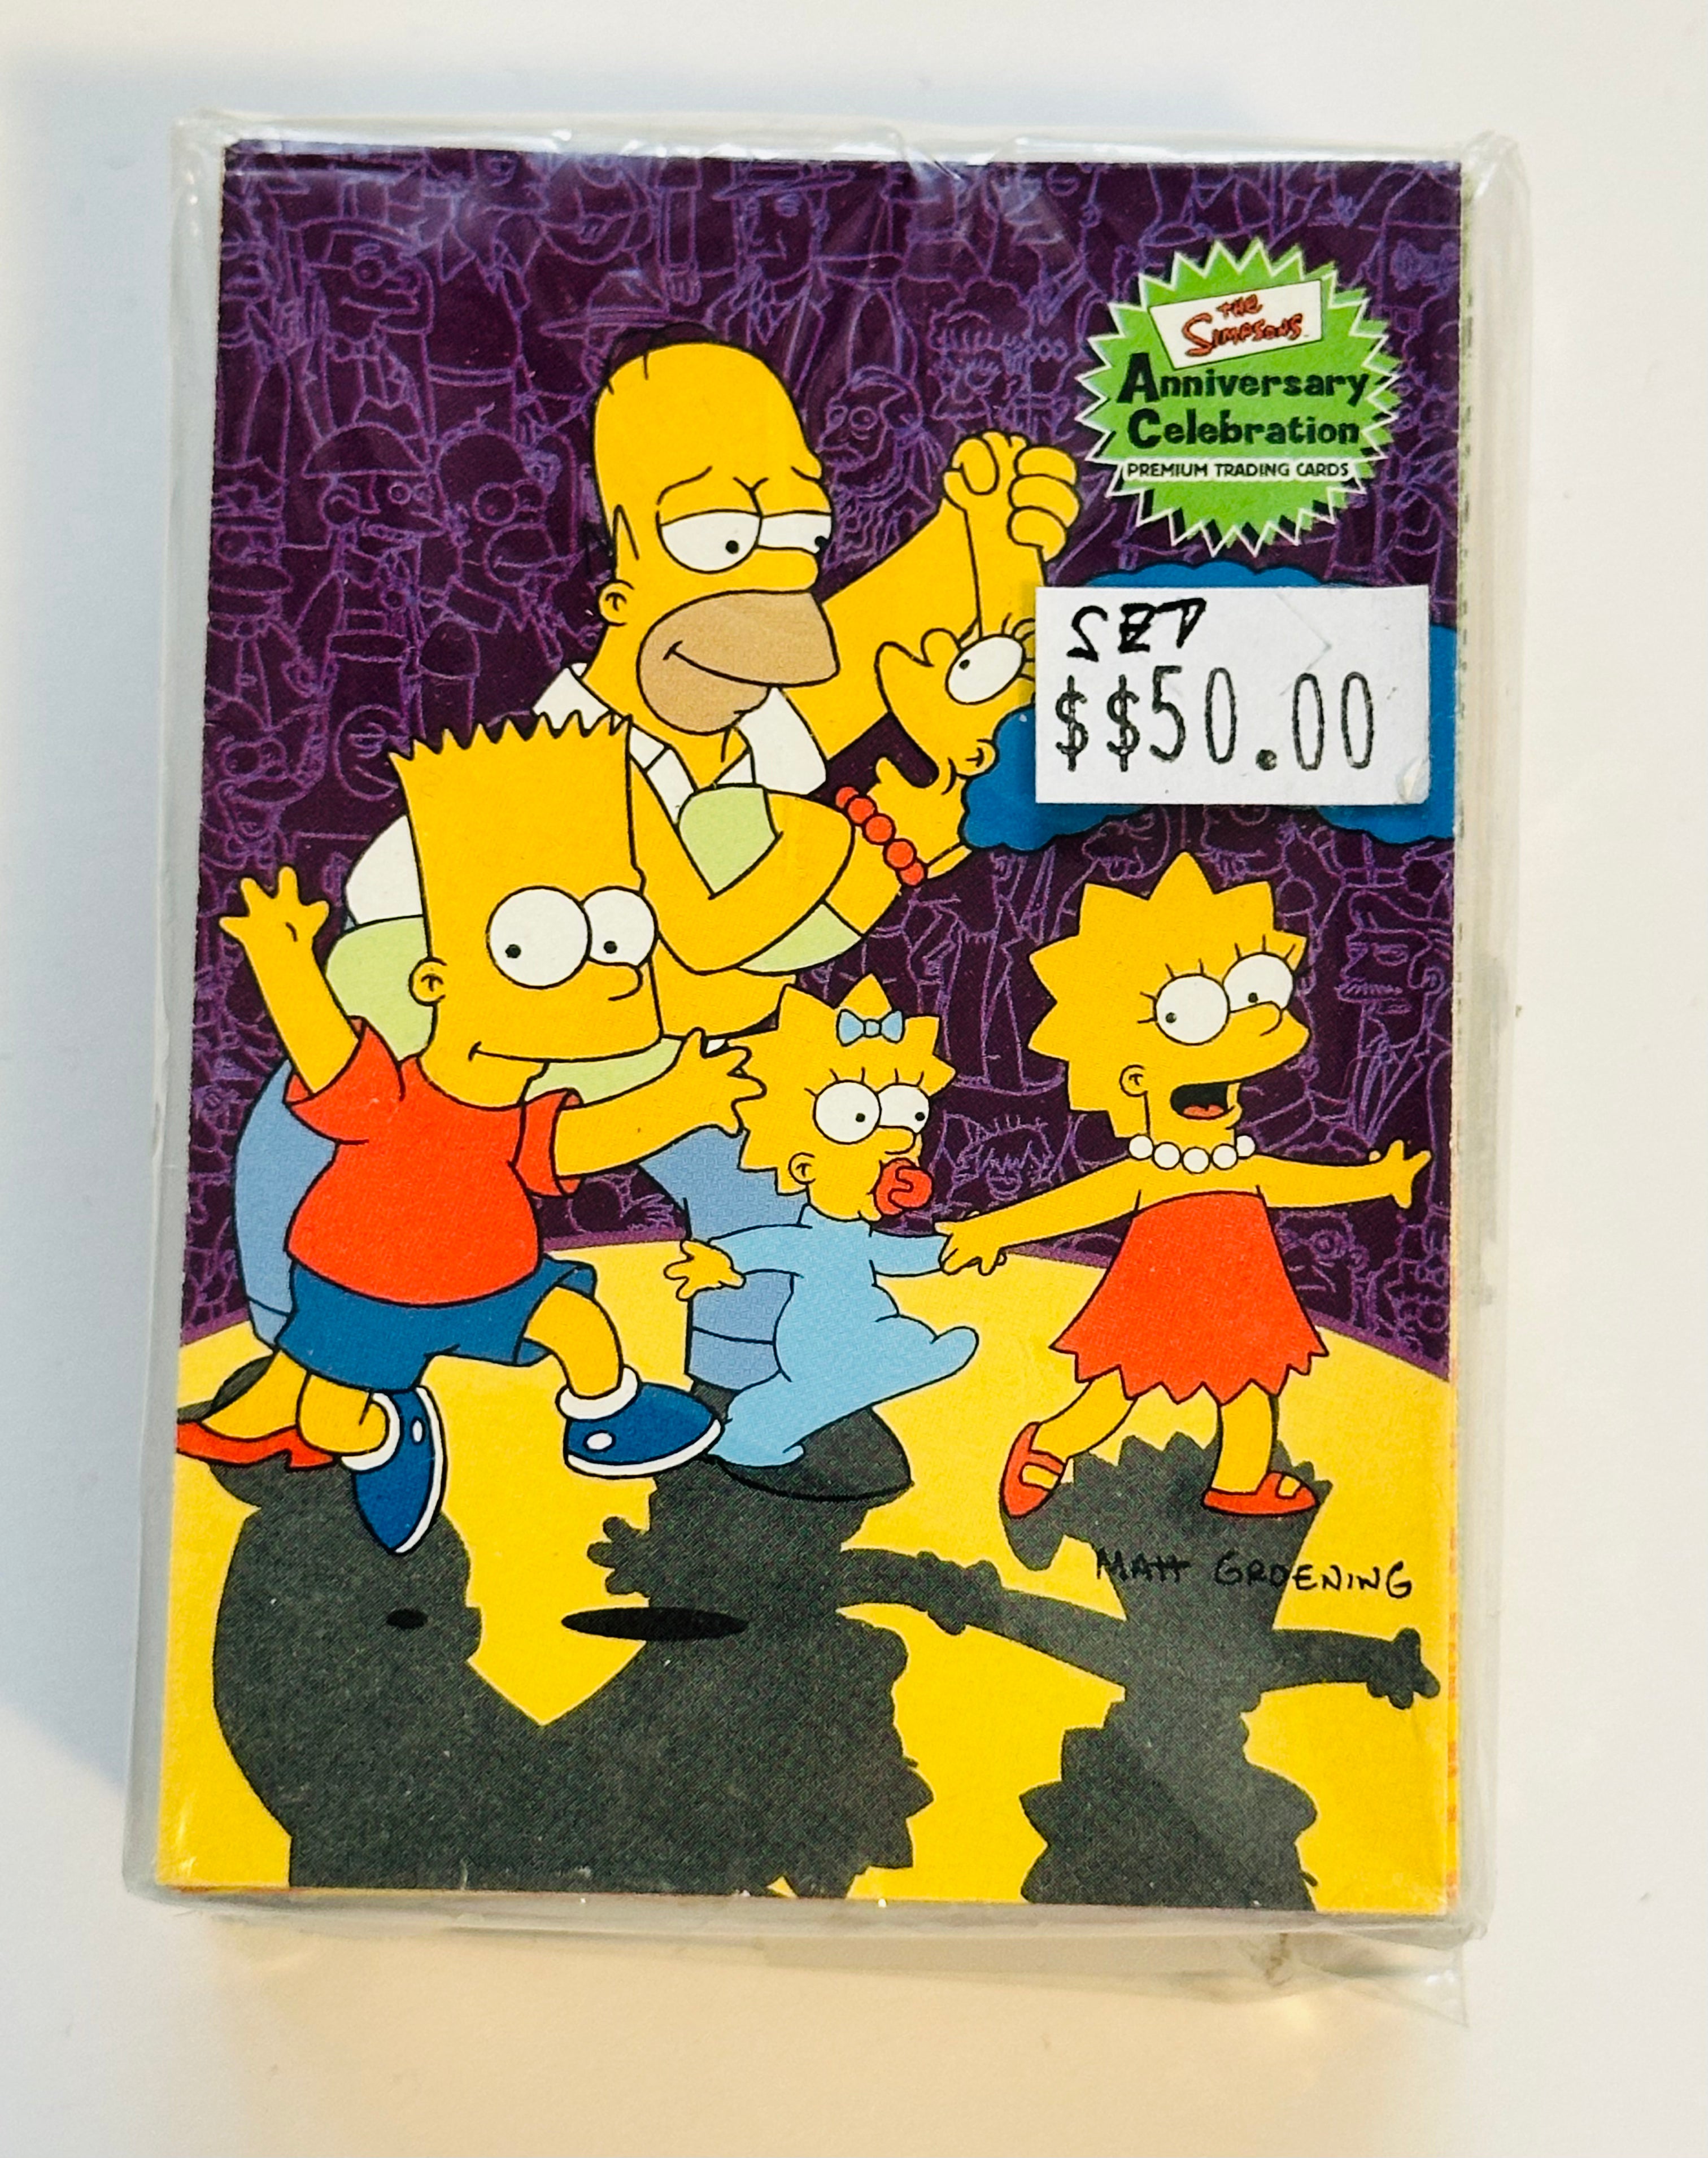 The Simpsons anniversary cards 2000